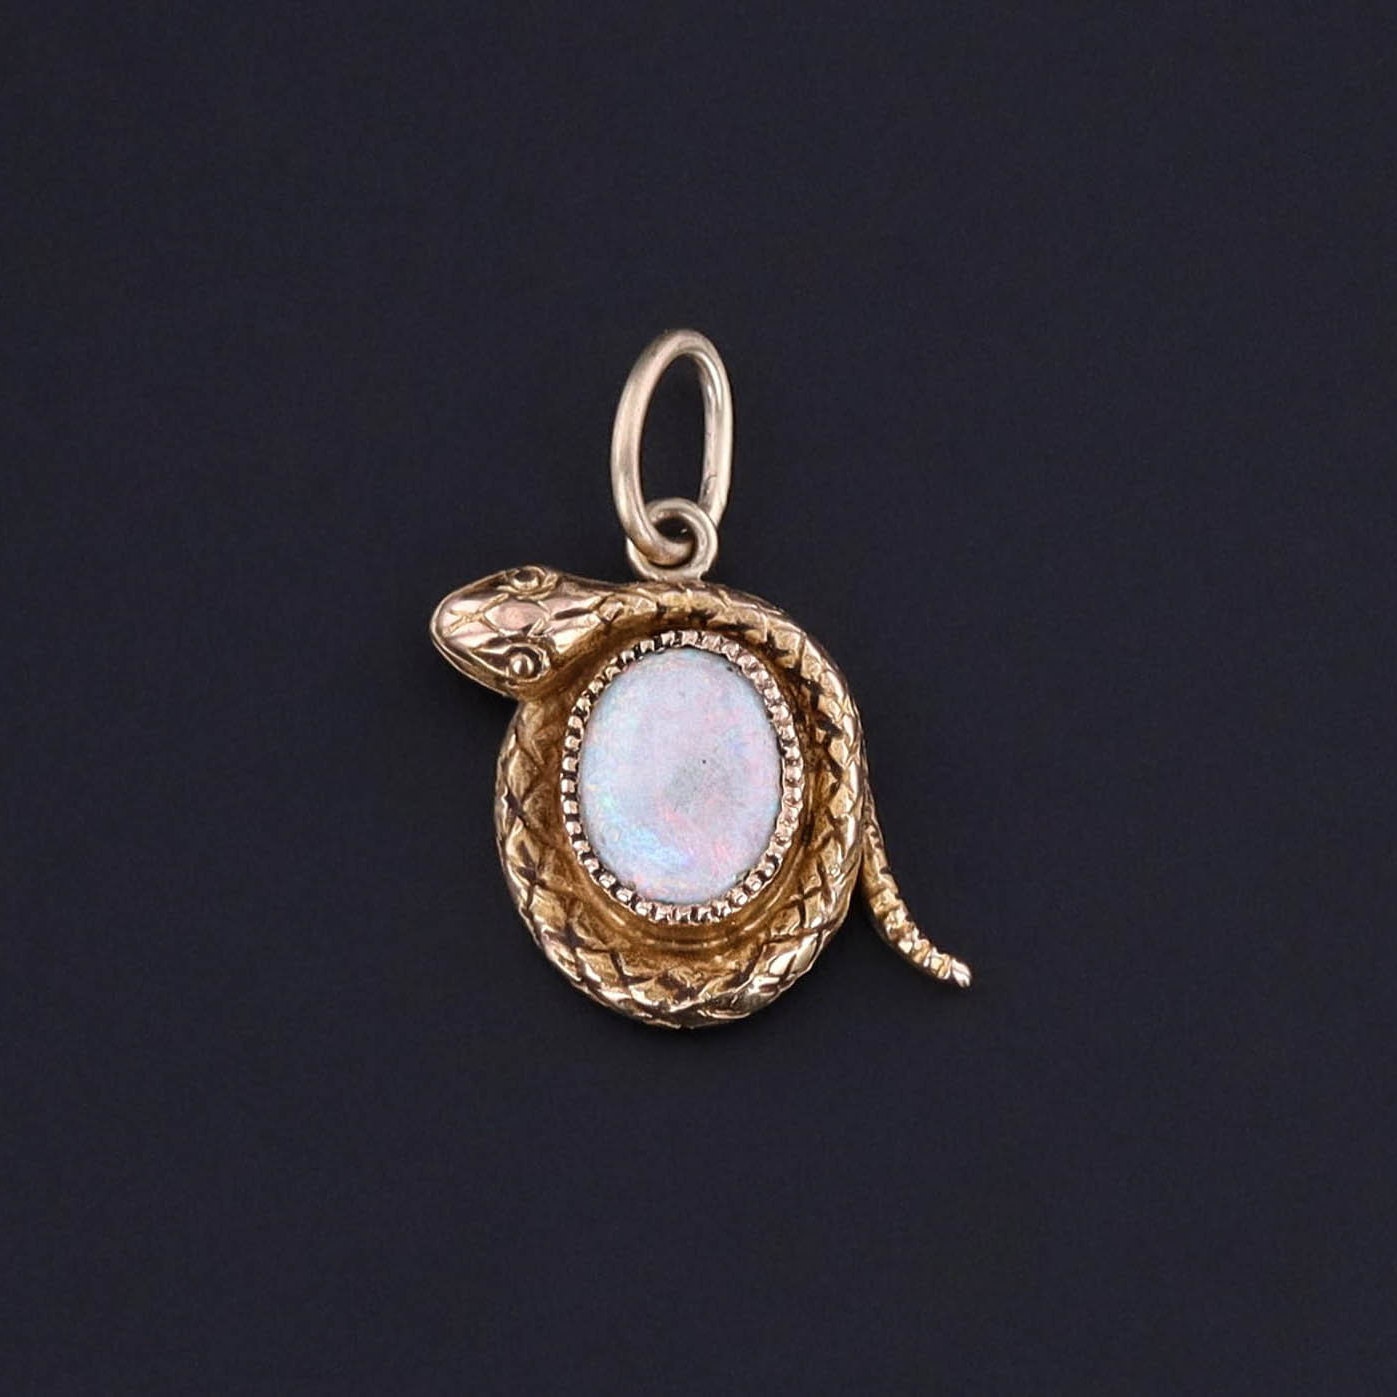 An antique 14k gold and opal snake charm created from a stick pin circa 1900. The antique charm is in great condition and perfect for any antique jewelry lover or charm collector. It would look great on a bracelet or chain.